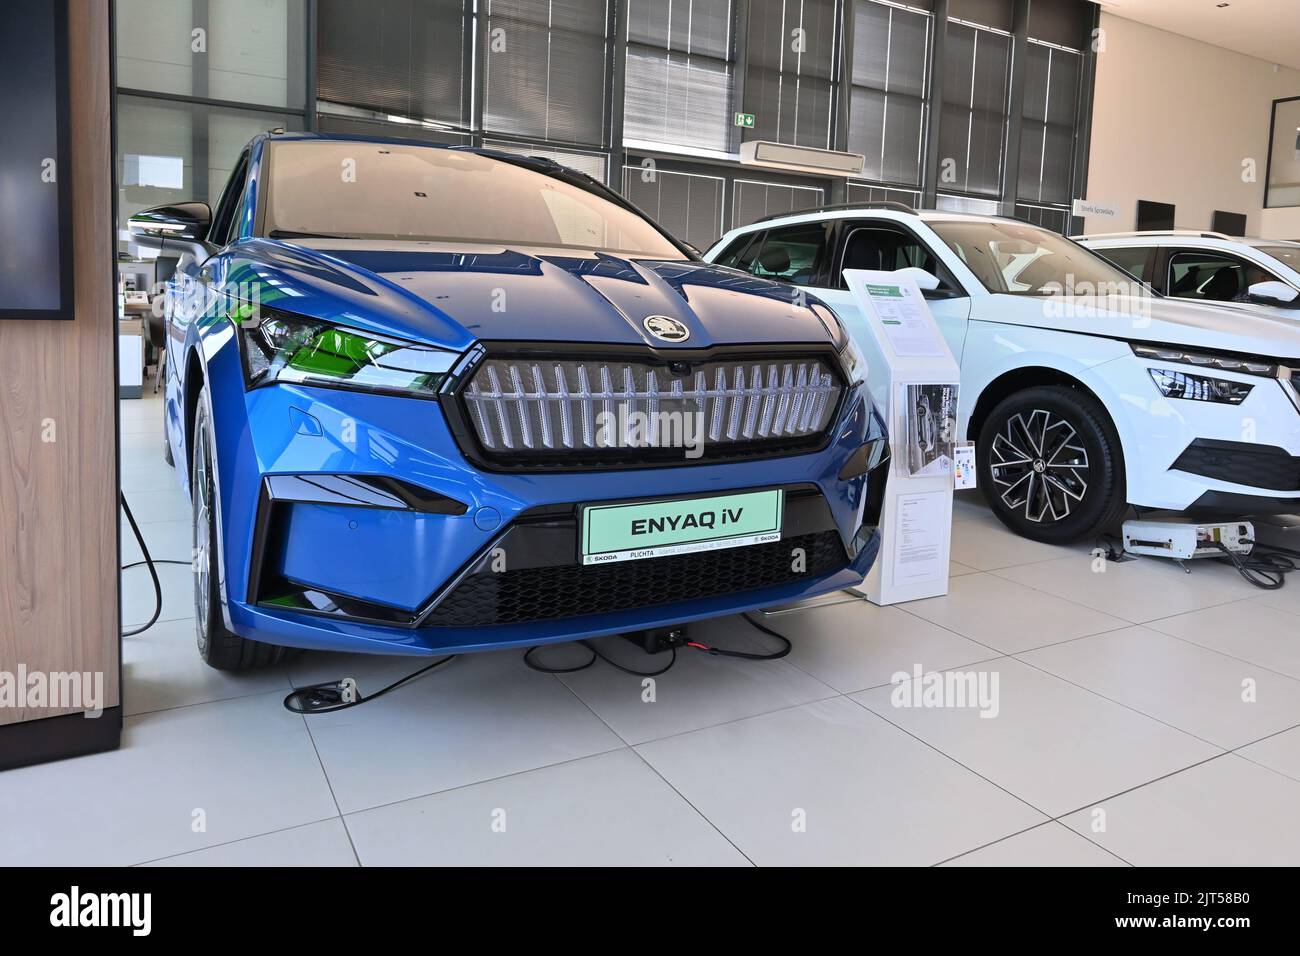 Gdansk, Poland - August 27, 2022: New model of Skoda Enyaq IV electric SUV presented in the car showroom of Gdansk Stock Photo